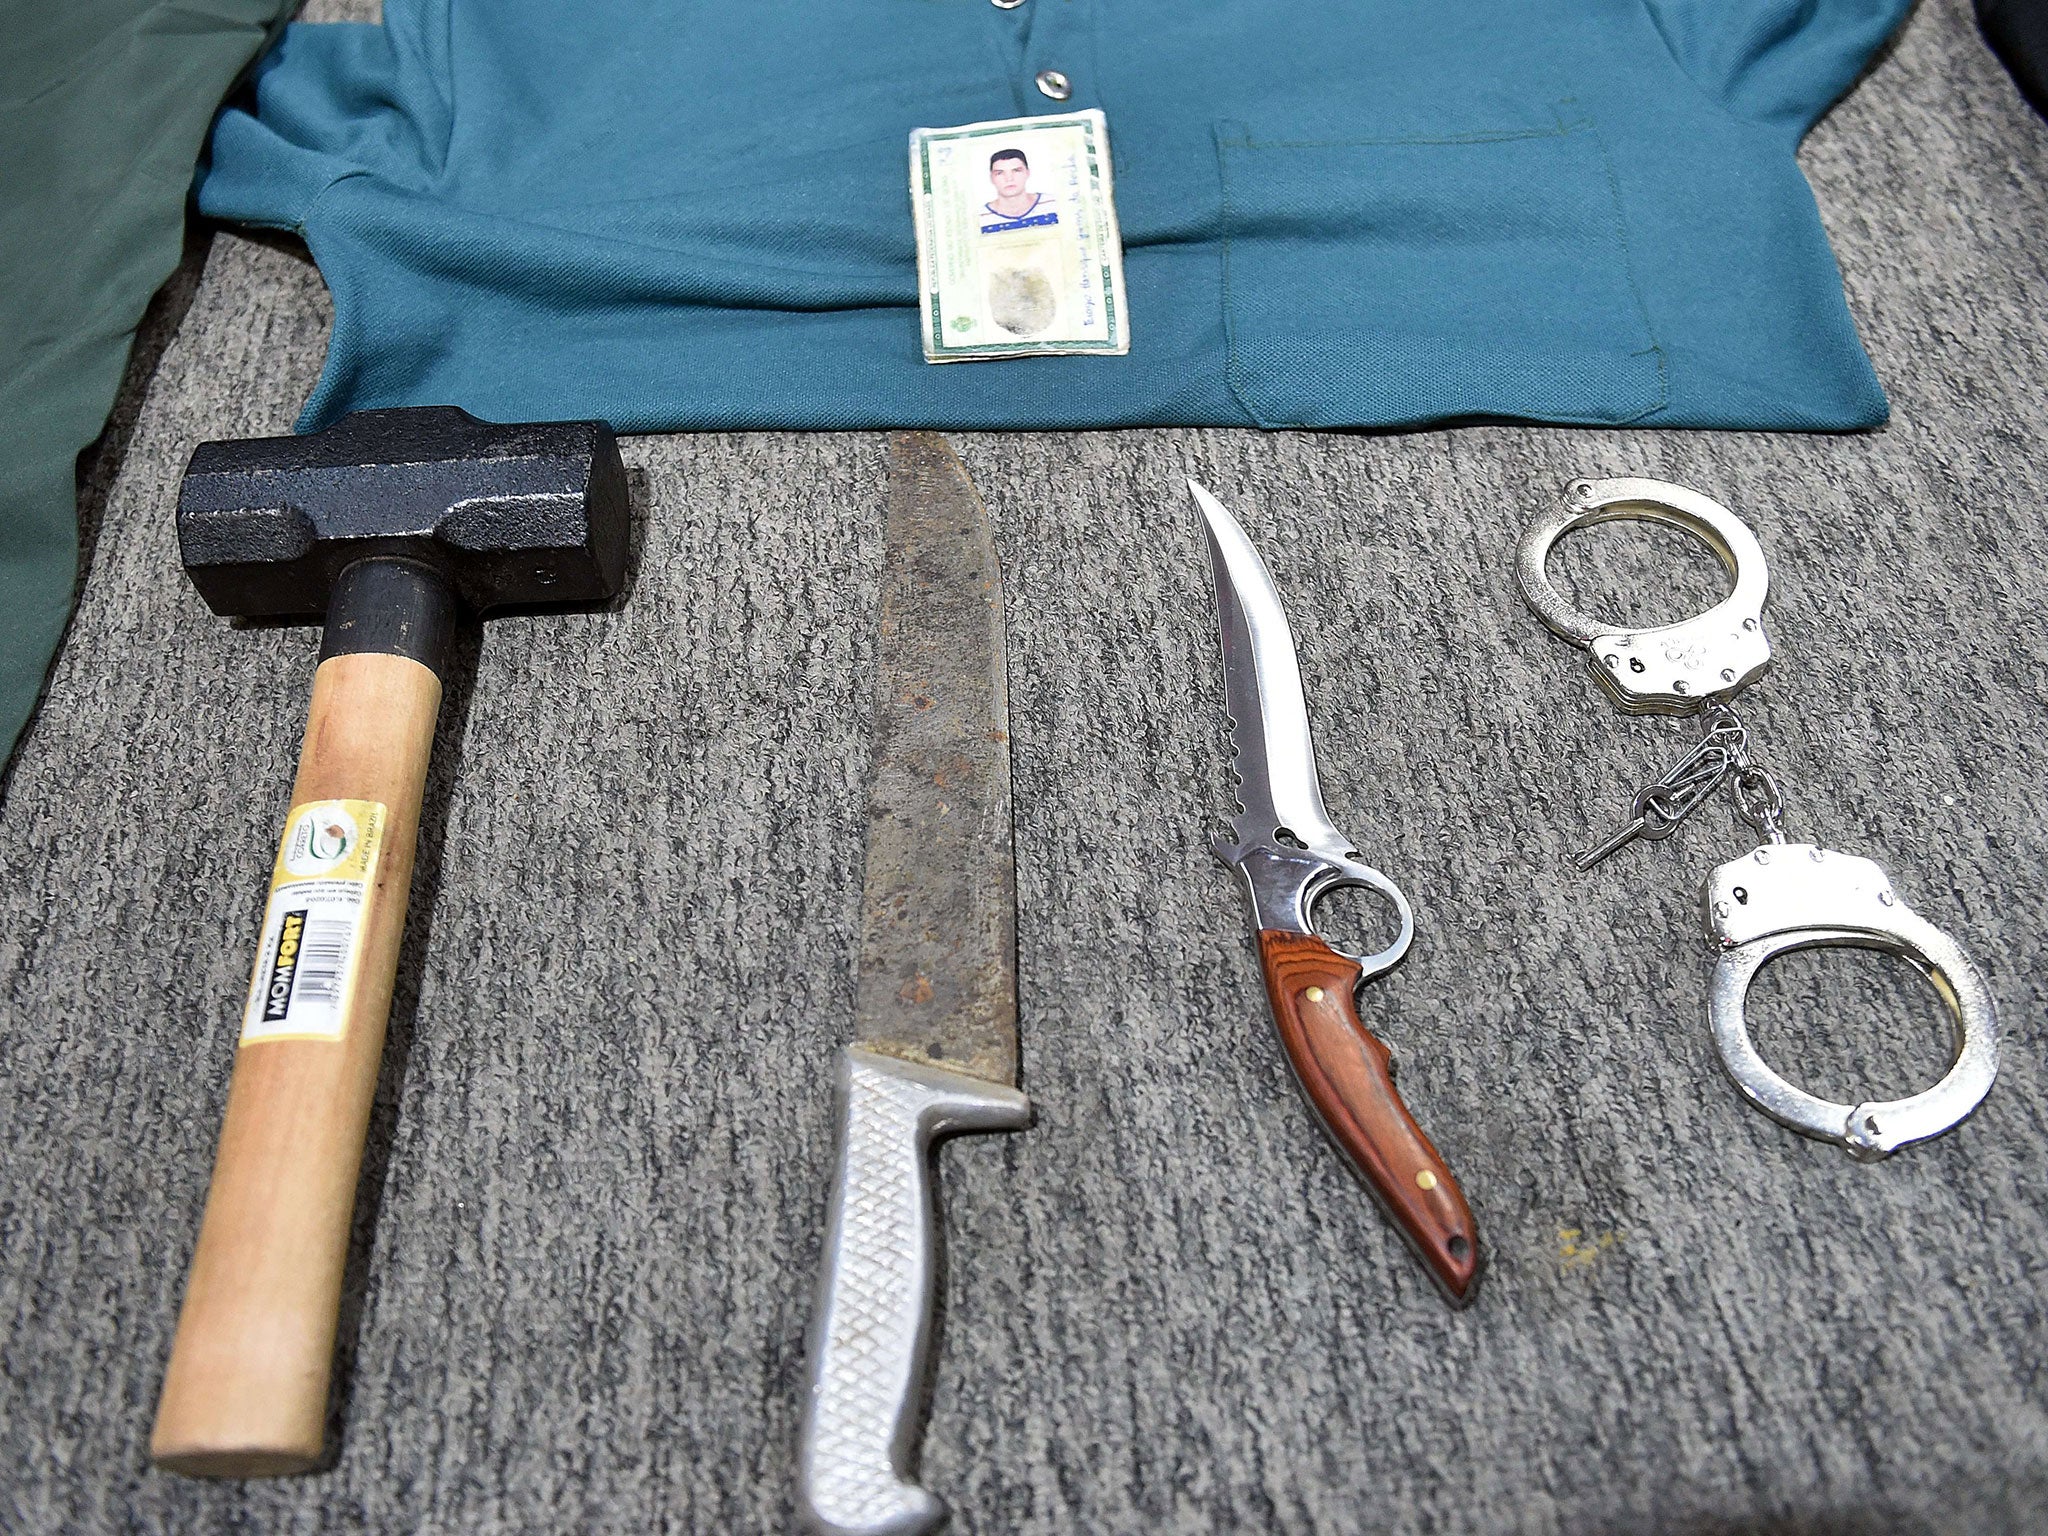 Items seized during Rocha's arrest